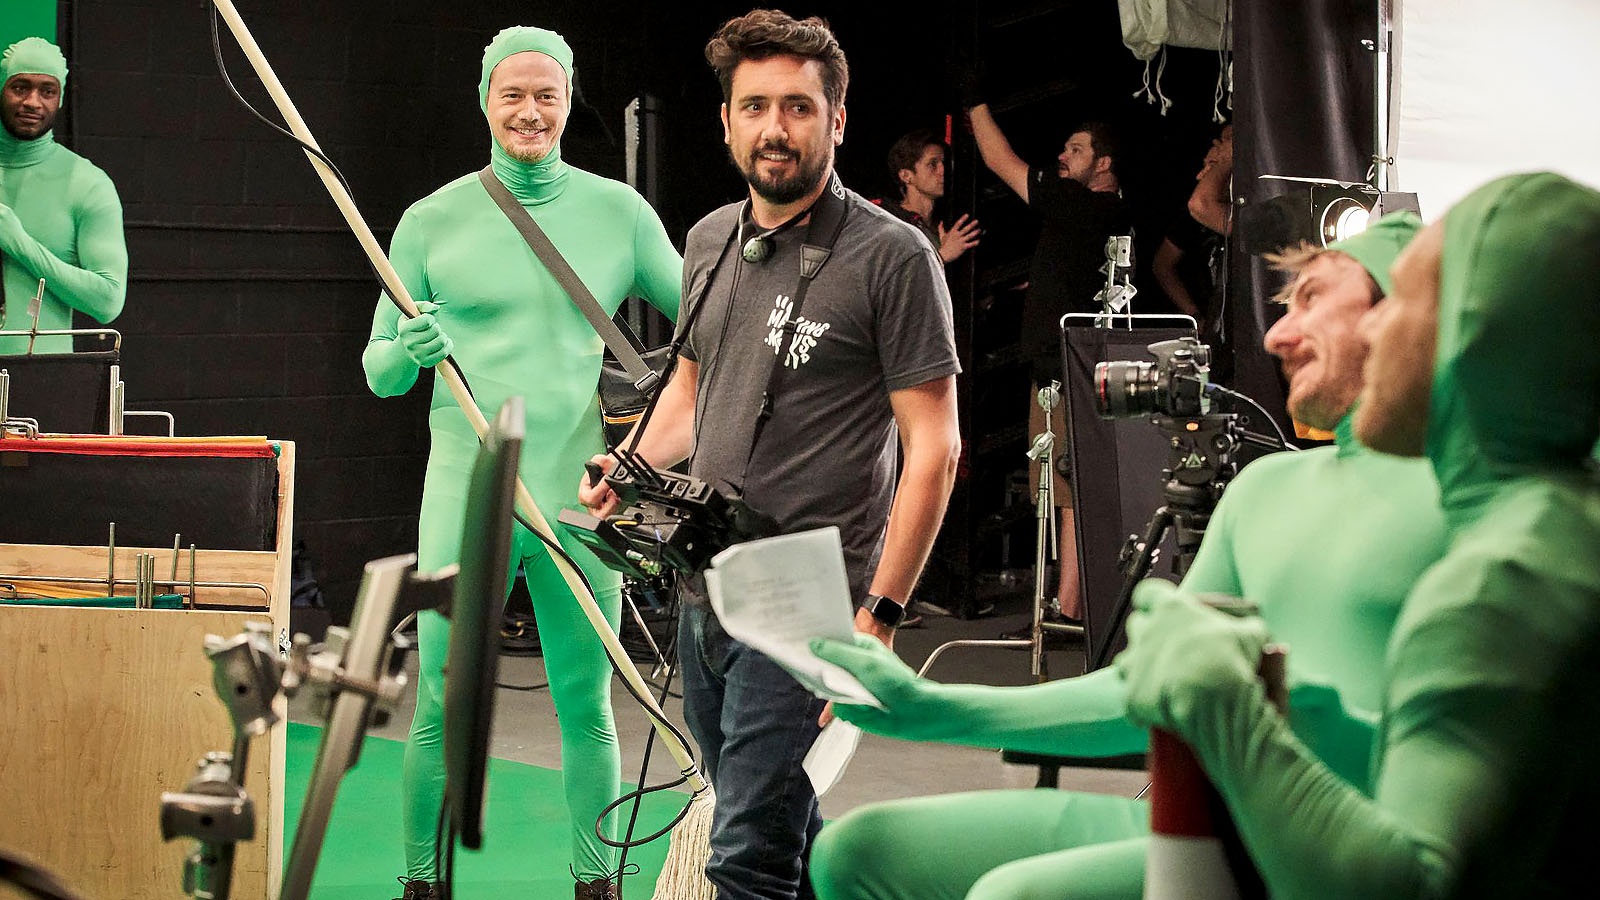 Vince in his element, surrounded by actors in green morphsuits on the set for Faith Based.